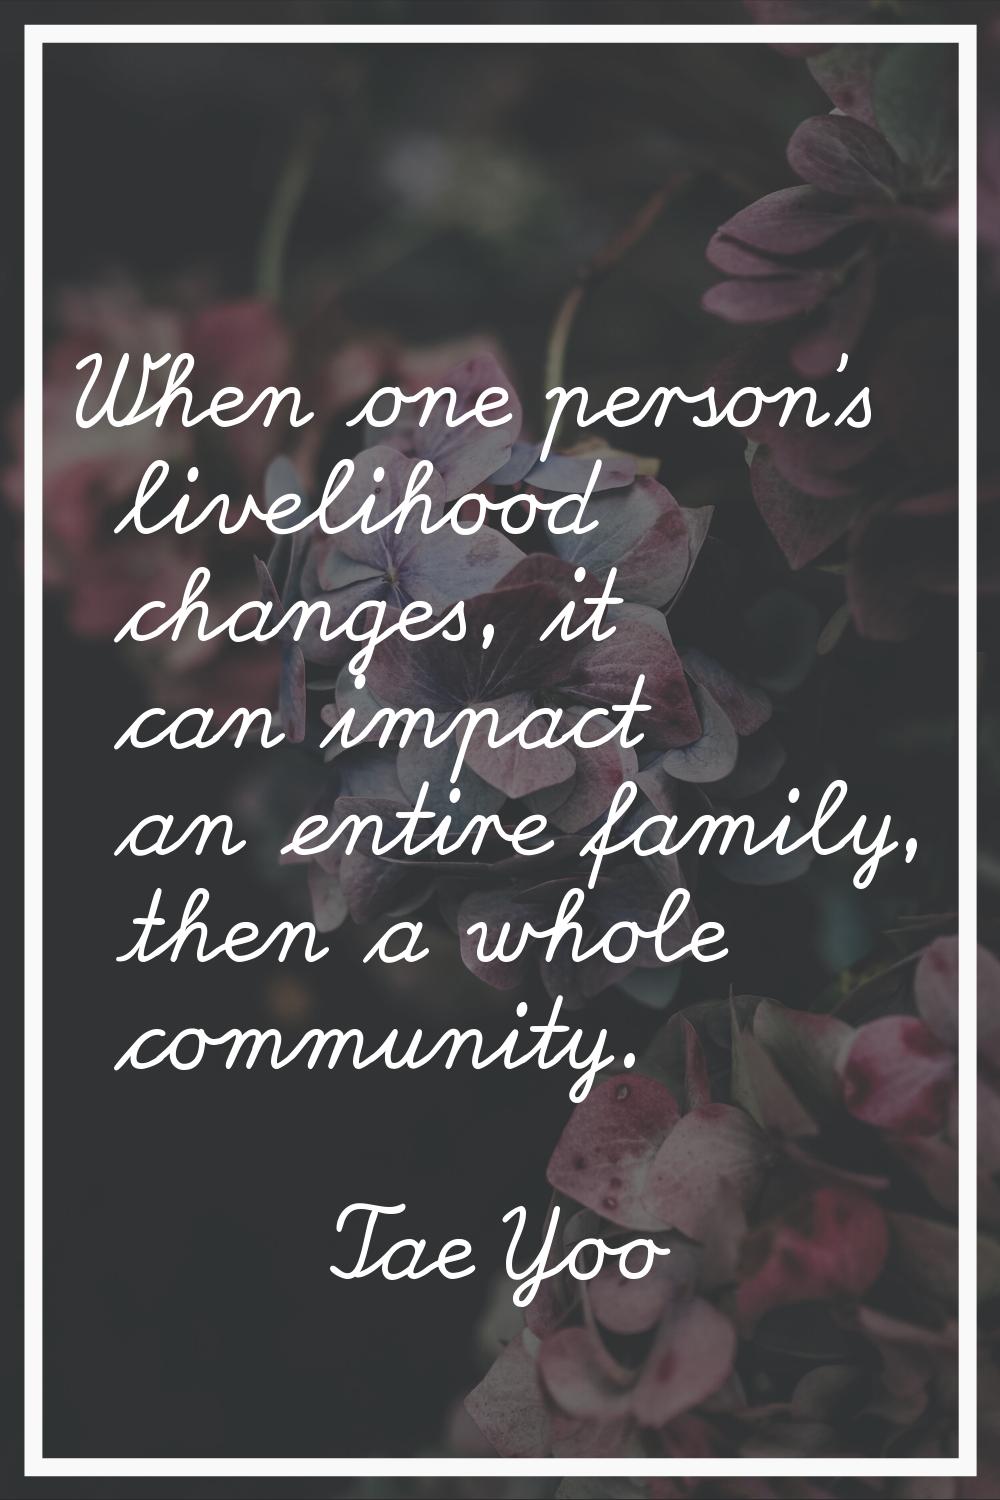 When one person's livelihood changes, it can impact an entire family, then a whole community.